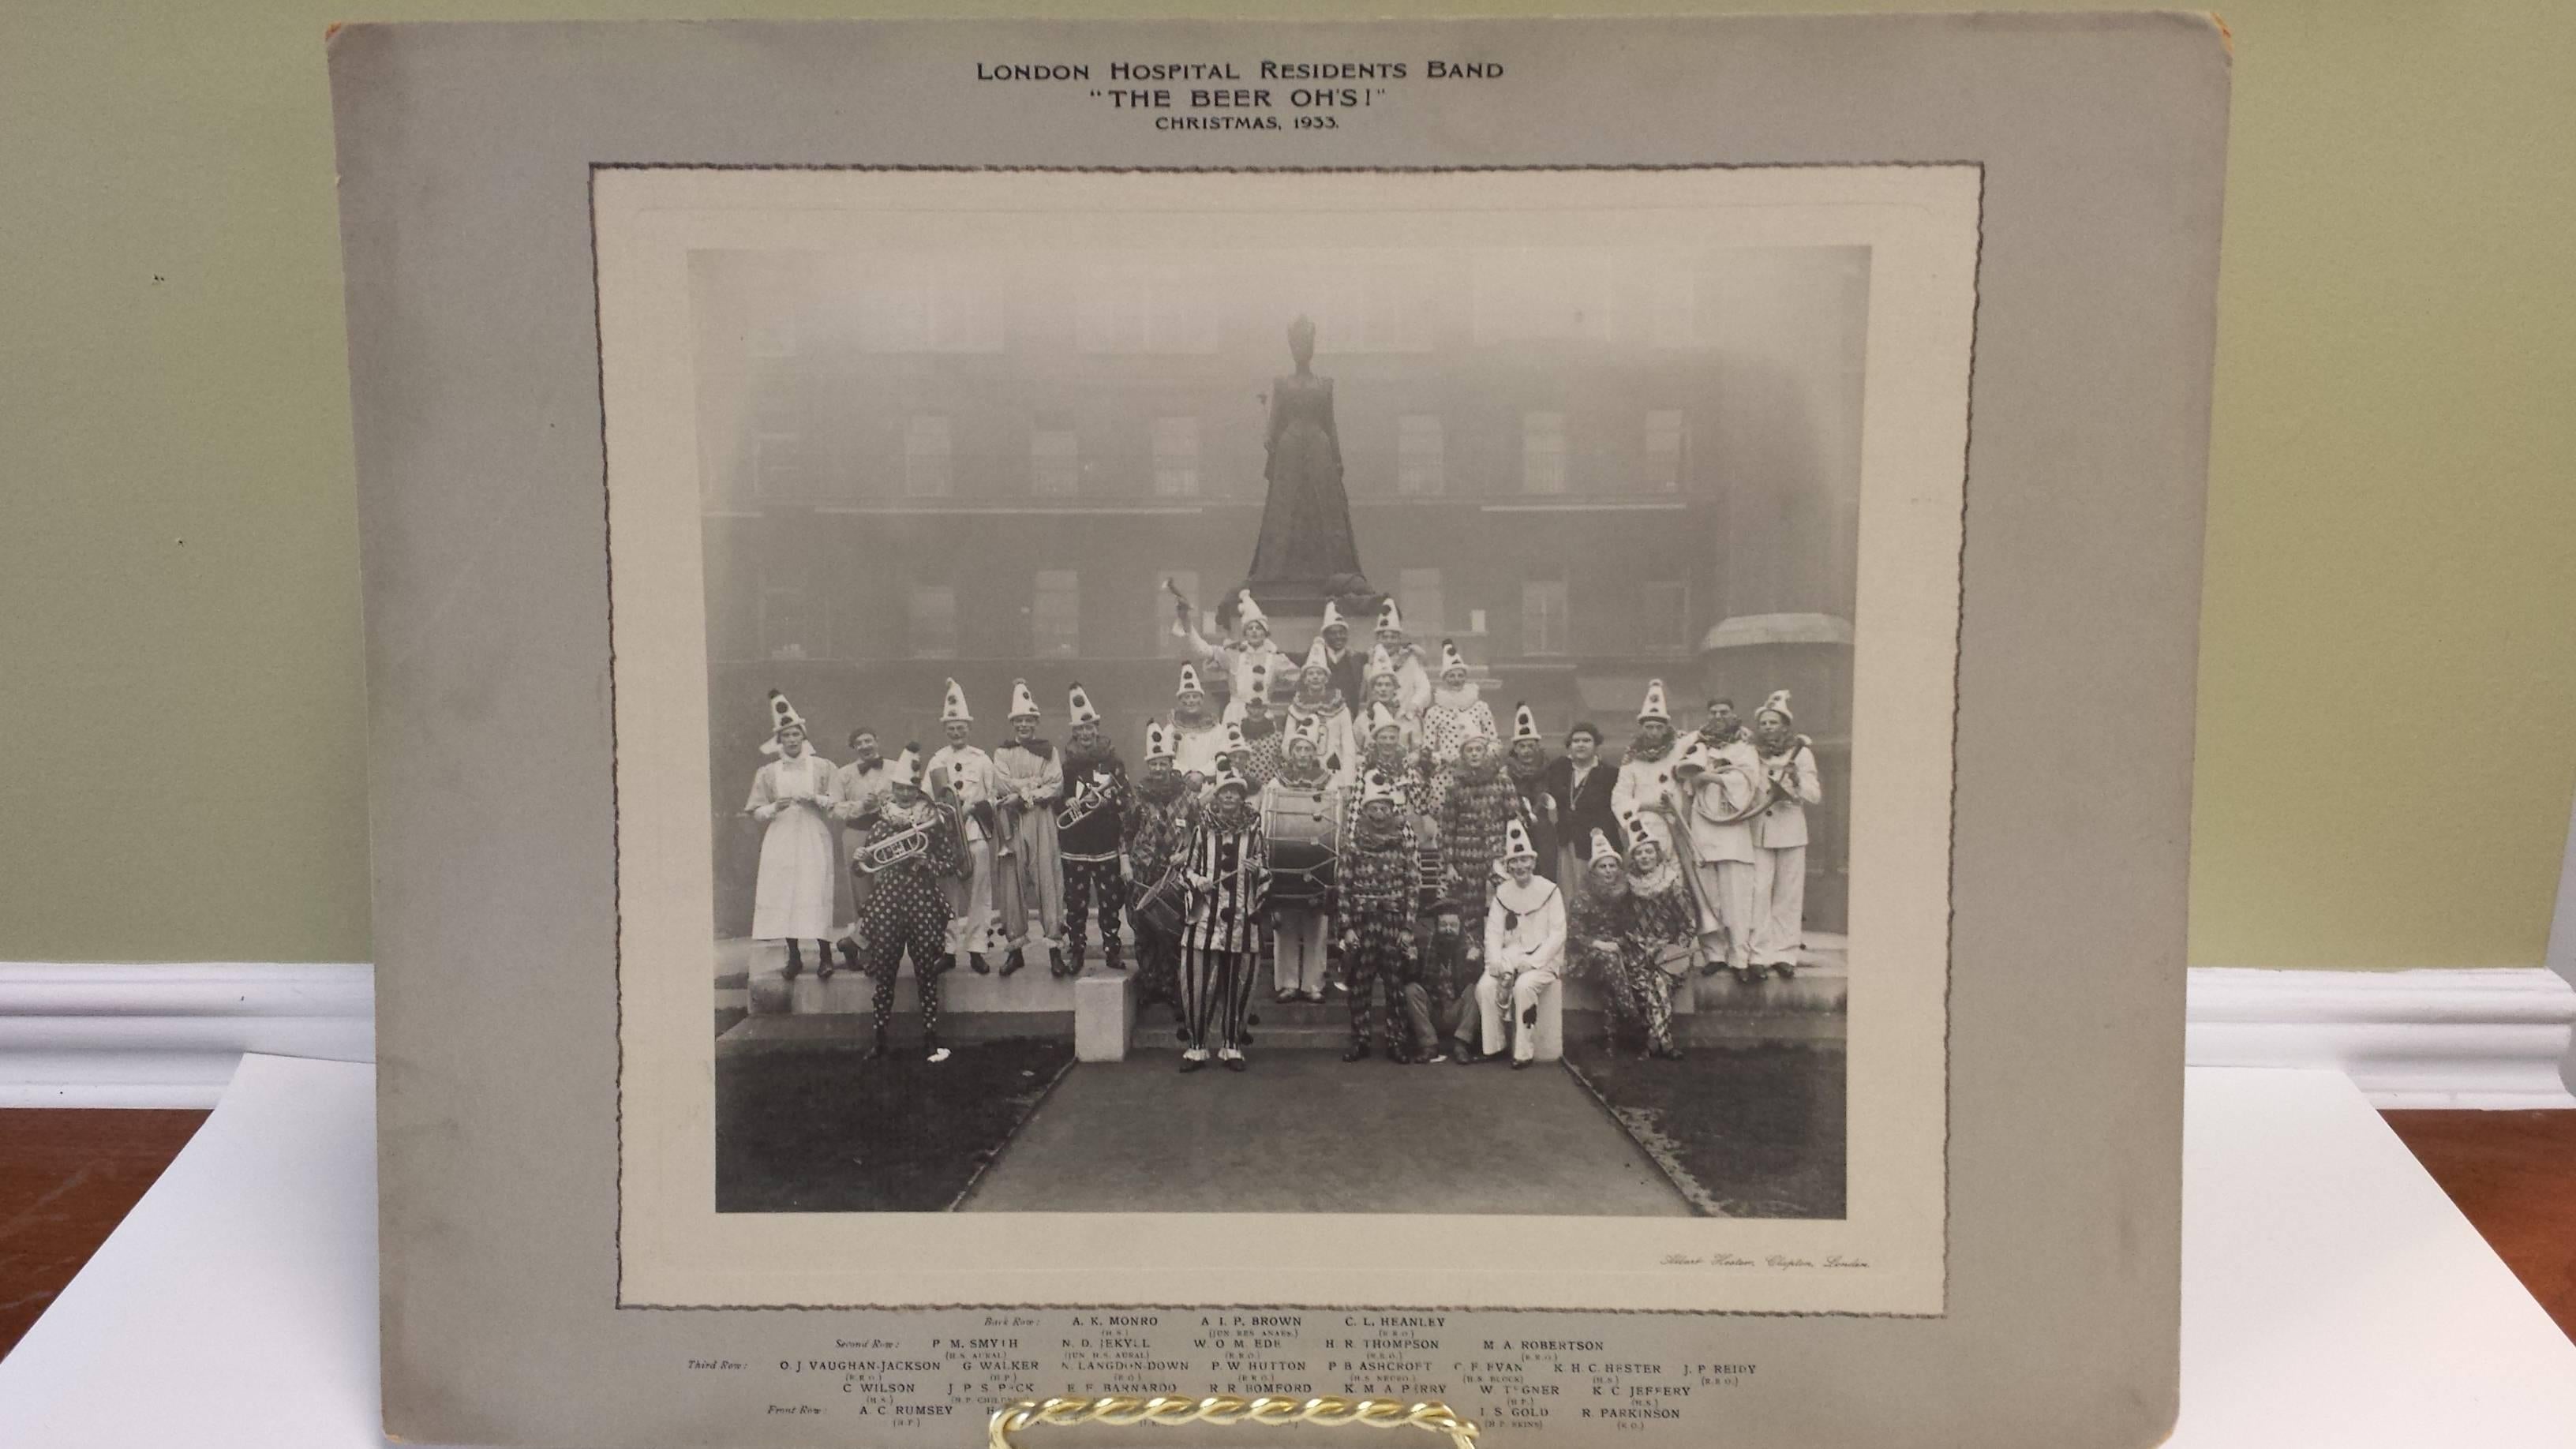 Arts and Crafts Albert Hester Photograph 1933 Clapton London, London Hospital Residents Band